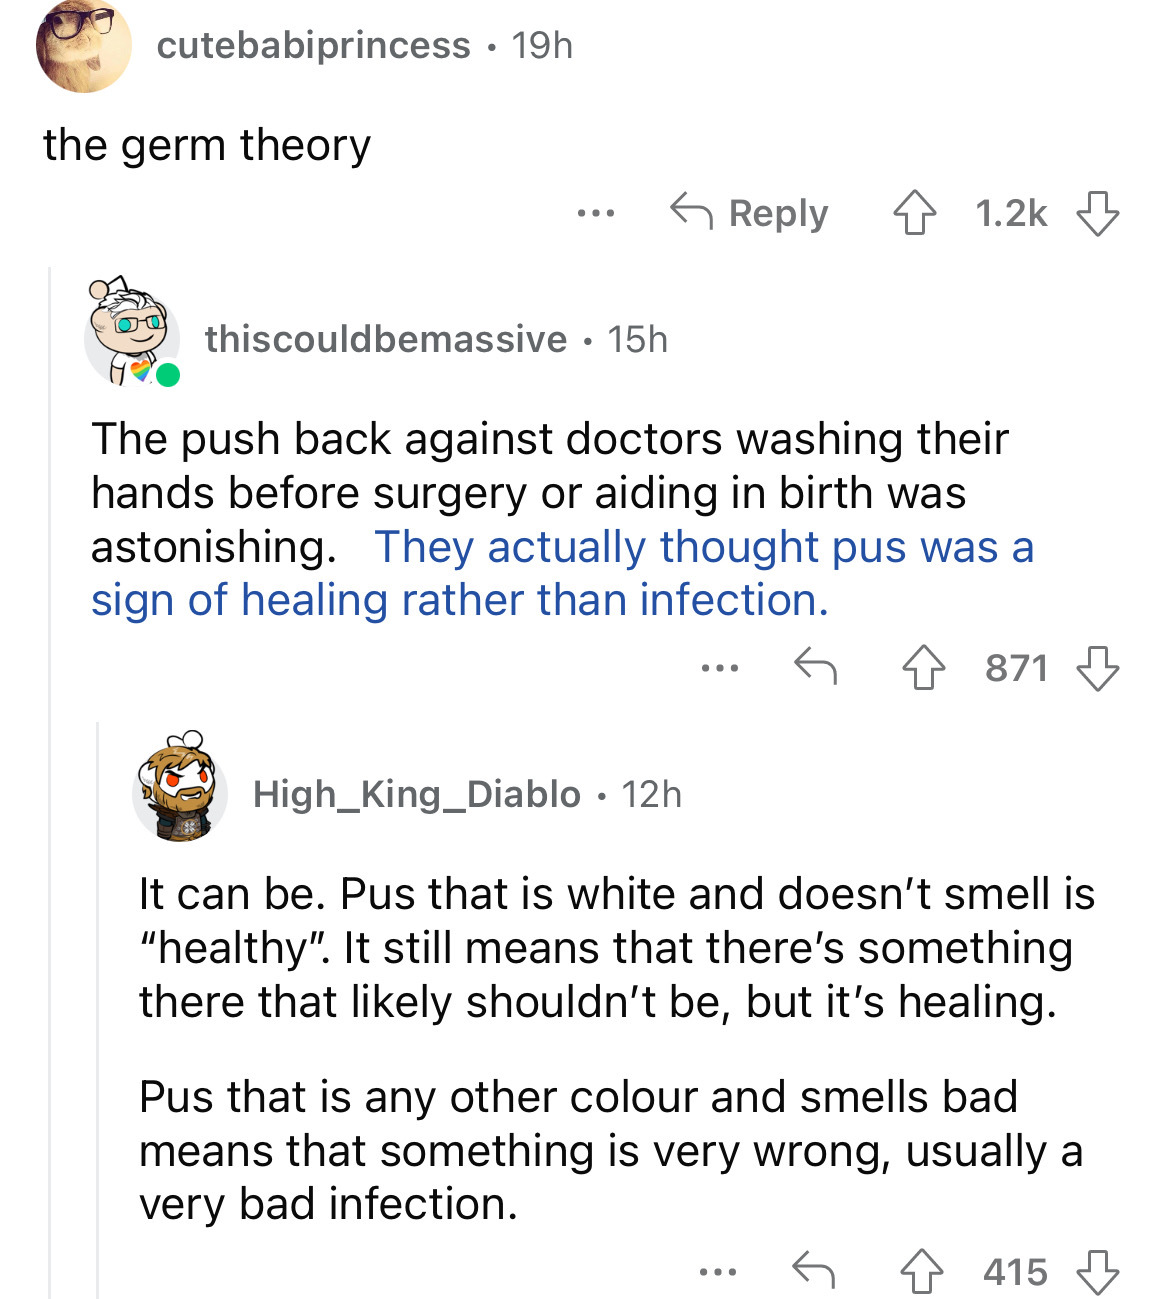 document - cutebabiprincess. 19h the germ theory ... thiscouldbemassive 15h The push back against doctors washing their hands before surgery or aiding in birth was astonishing. They actually thought pus was a sign of healing rather than infection. High_Ki